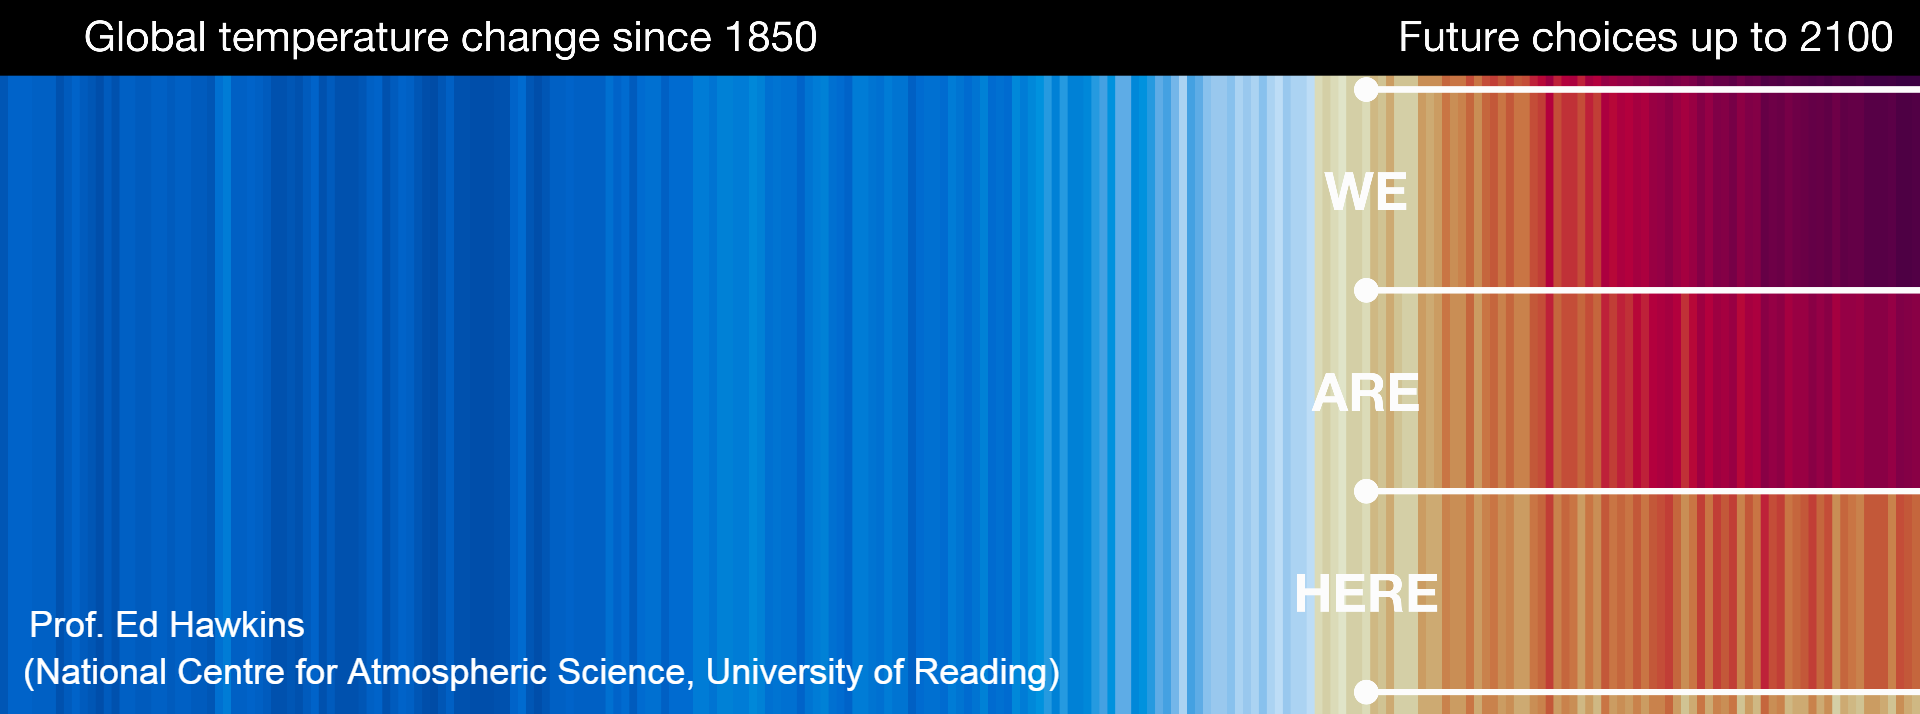 A chart showing change in average temperature since 1850, on the right side it shows it's our decision how much additional warming can commit to - or avoid - as a species